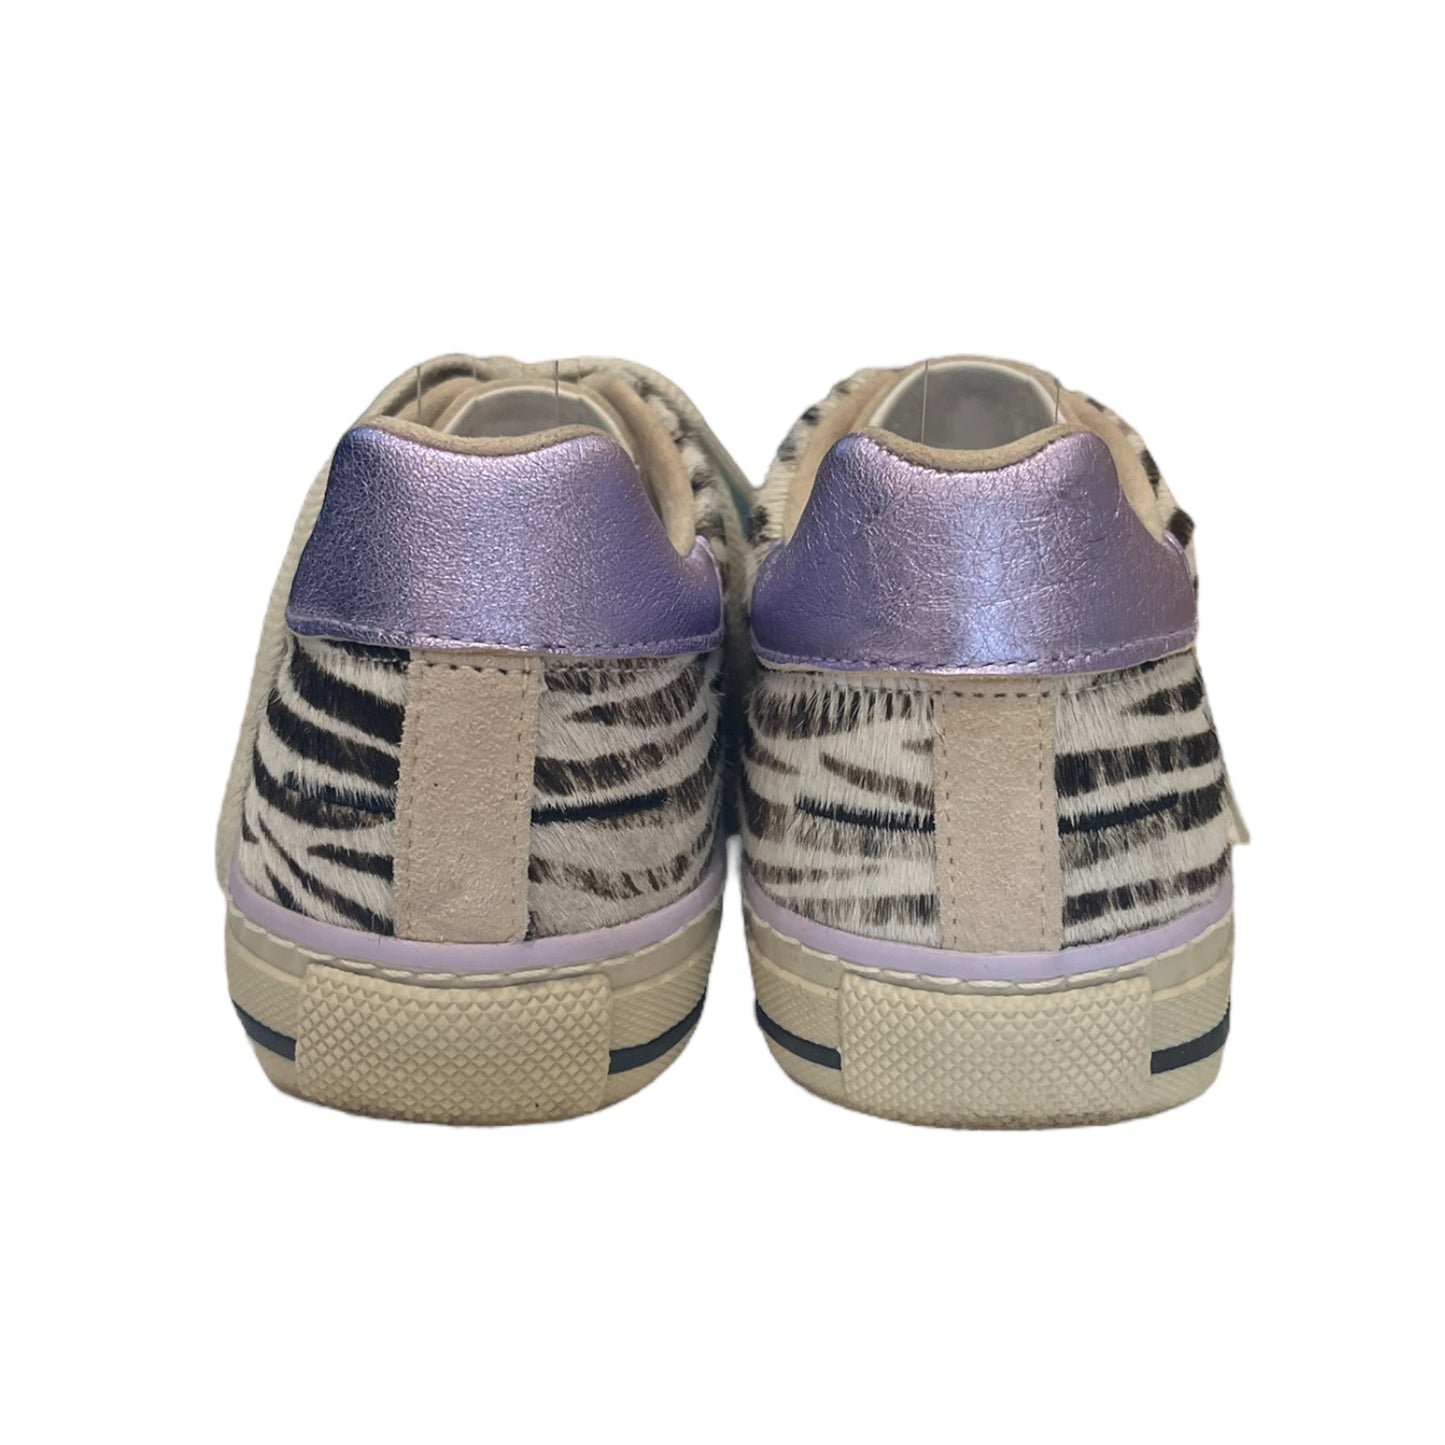 D.A.T.E. Lilac and Zebra Print Trainers